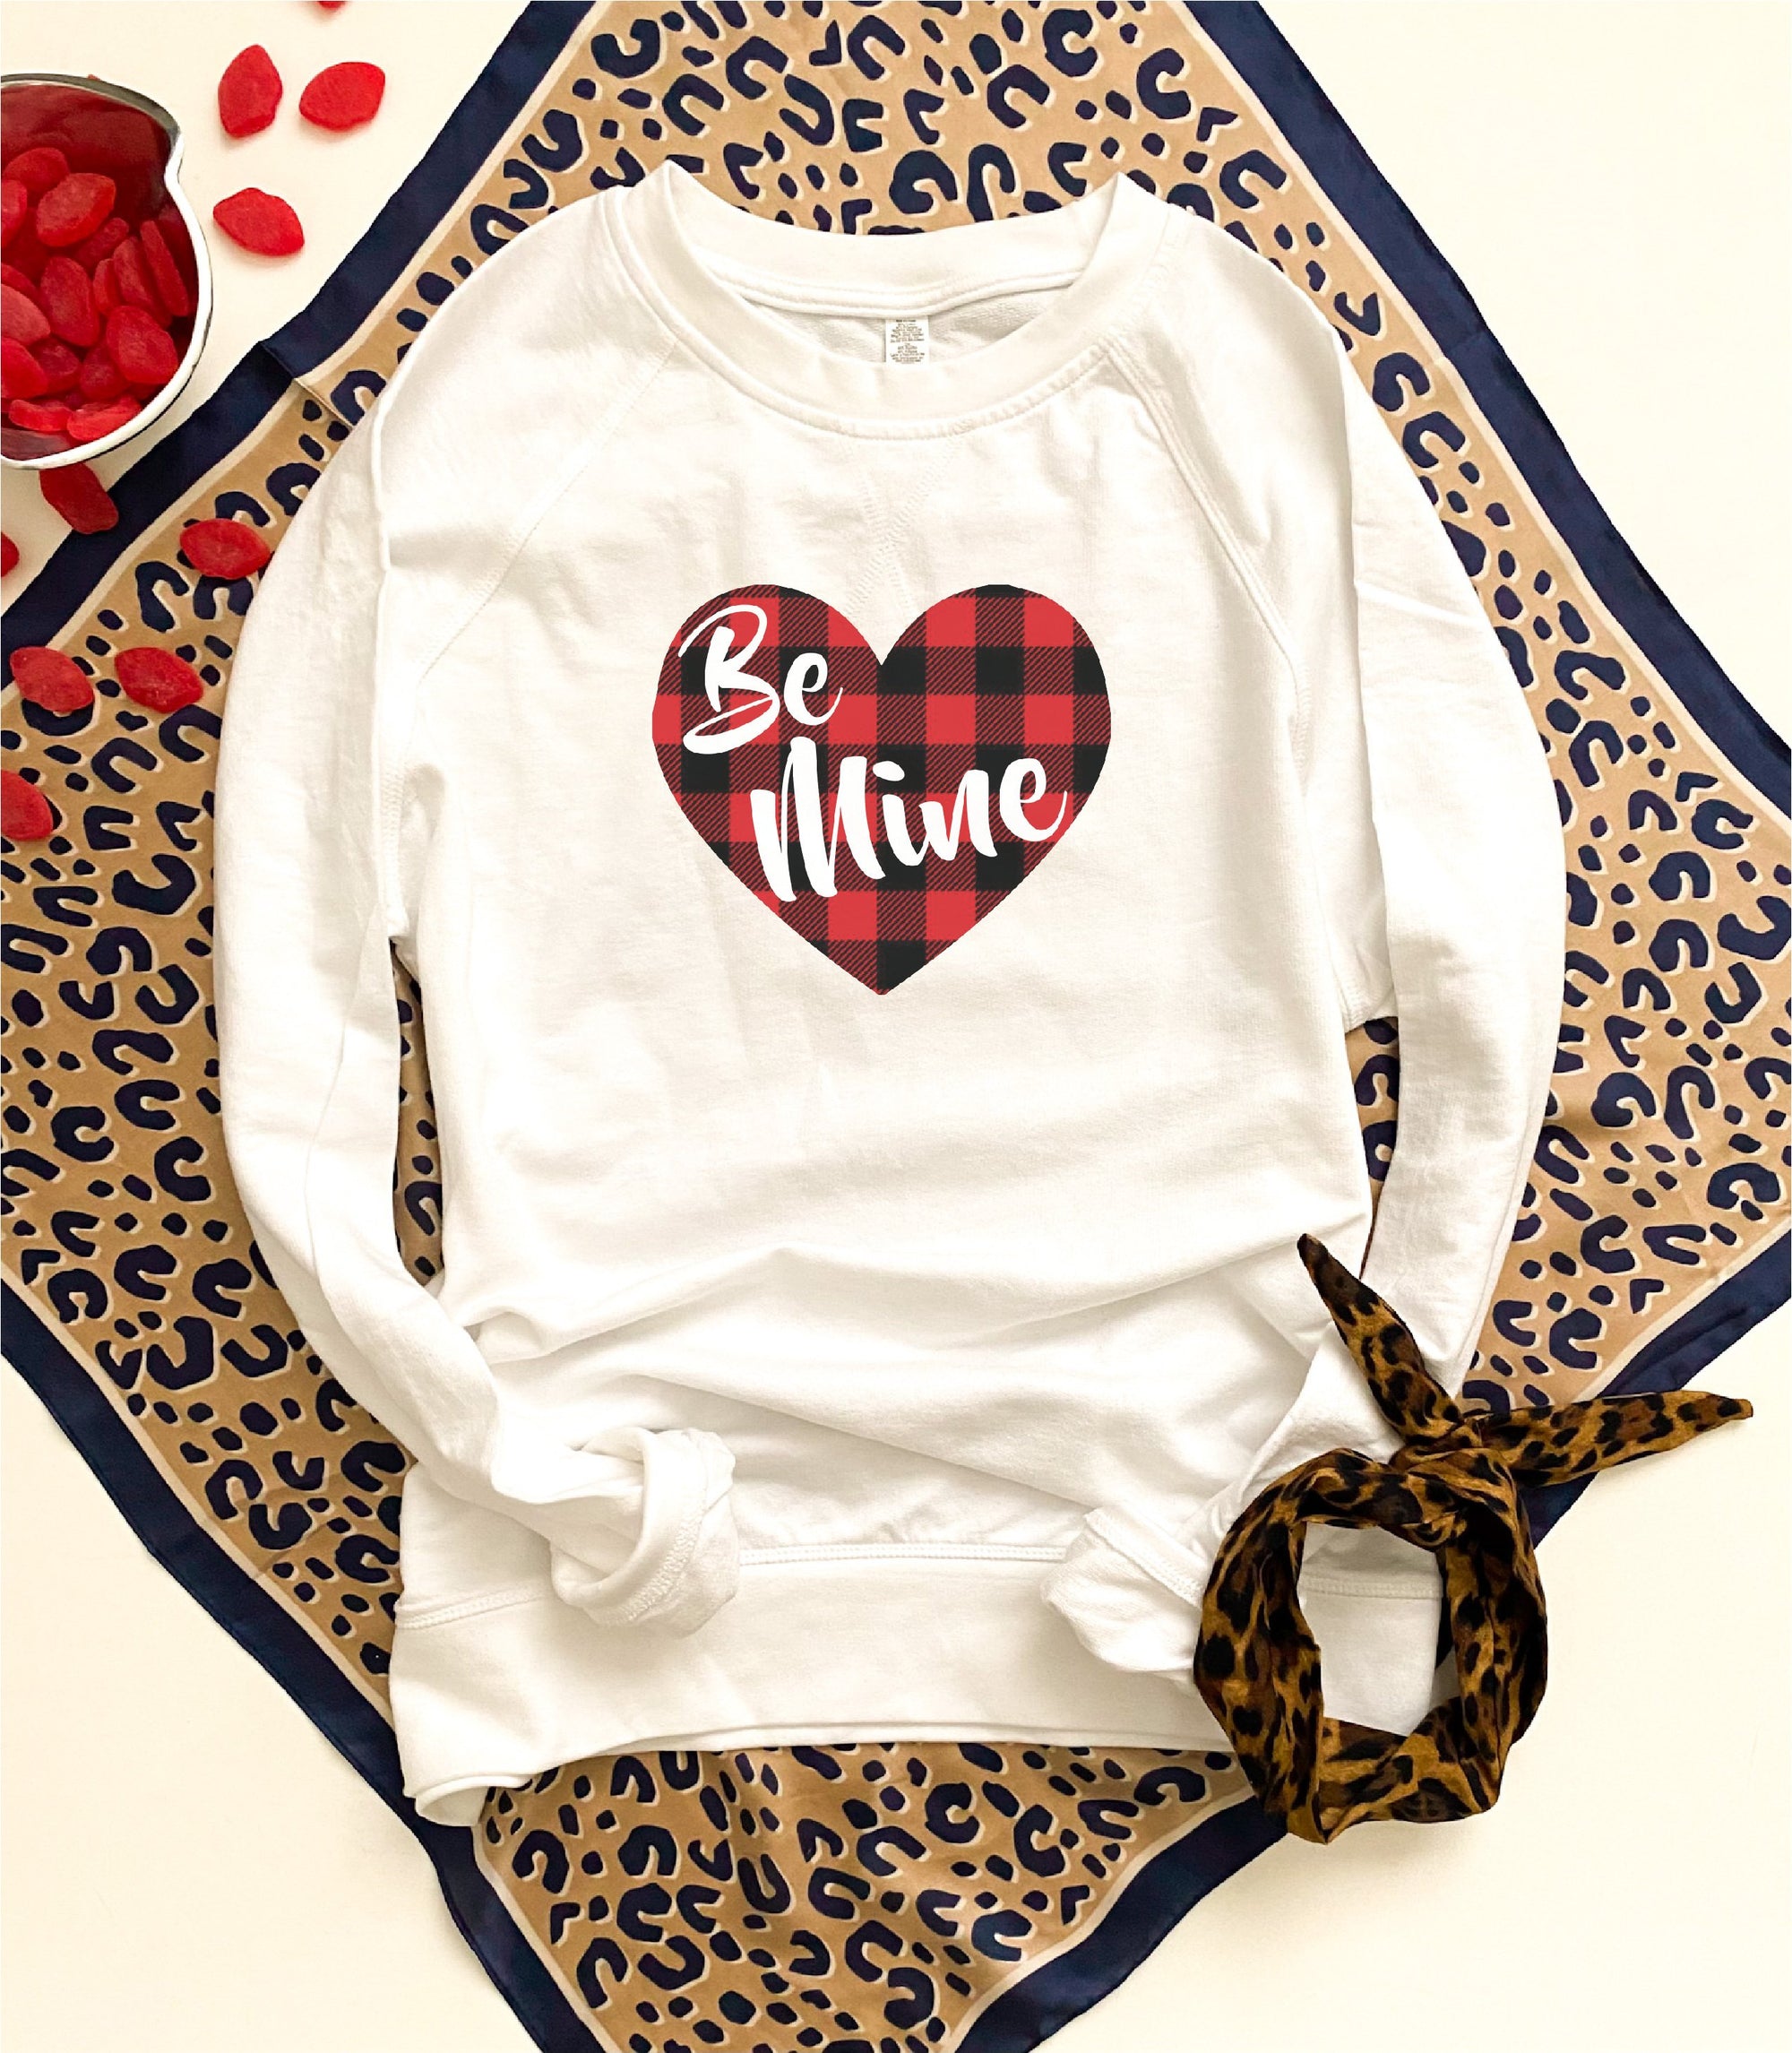 Copy of Be mine french terry raglan sweatshirt Valentines French Terry raglan Cotton heritage and lane seven French Terry raglan XS Heather grey 